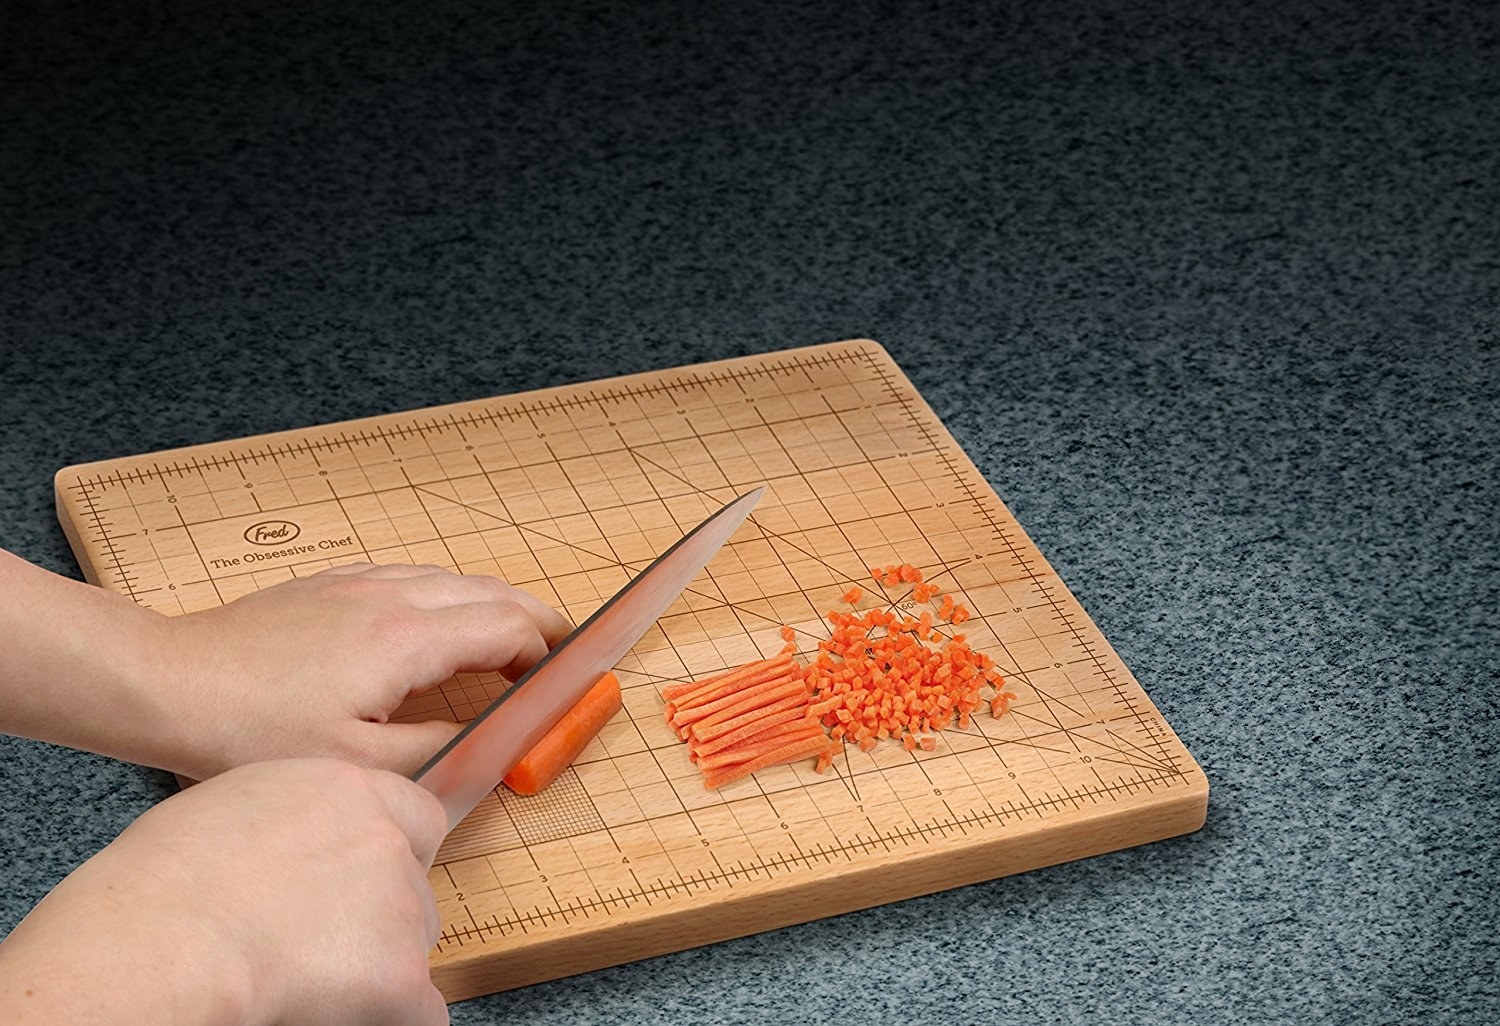 The cutting board with a grid of measurements to guide chopping, with someone julienning and small dicing a carrot on it